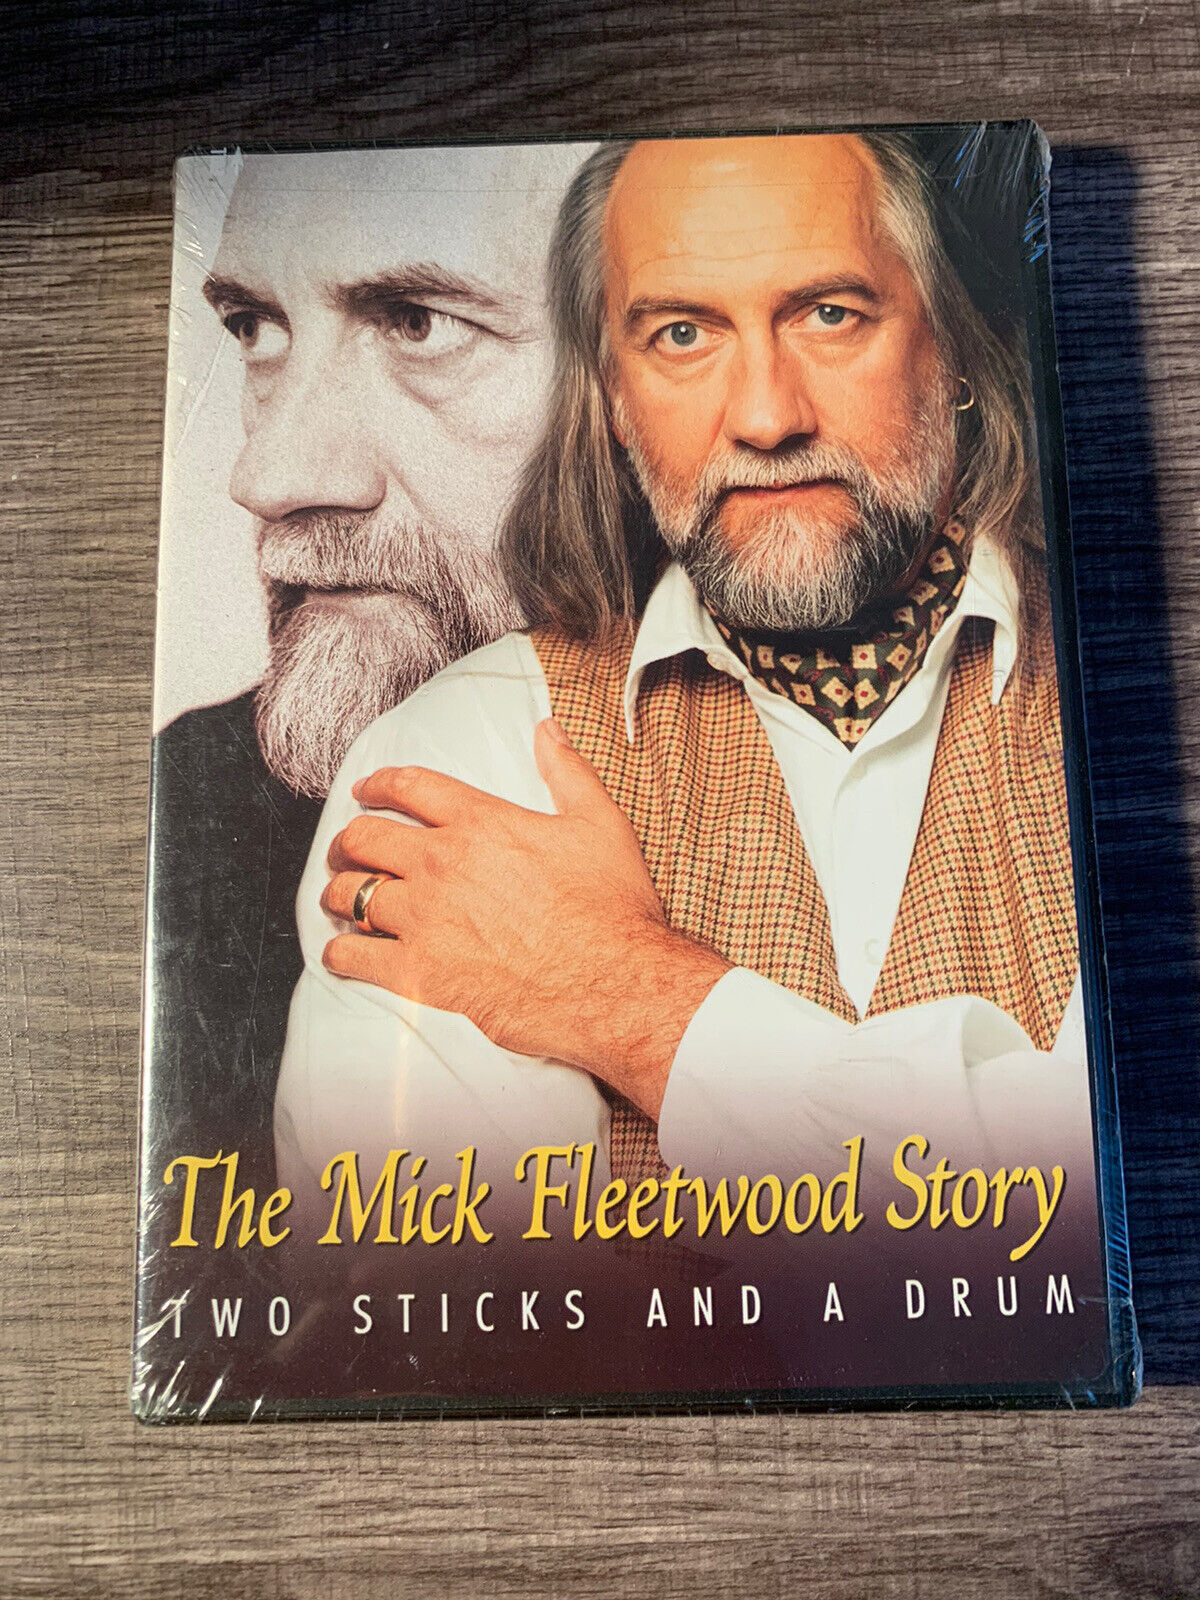 The Mick Fleetwood Story: Two Sticks And A Drum (DVD, 2002)